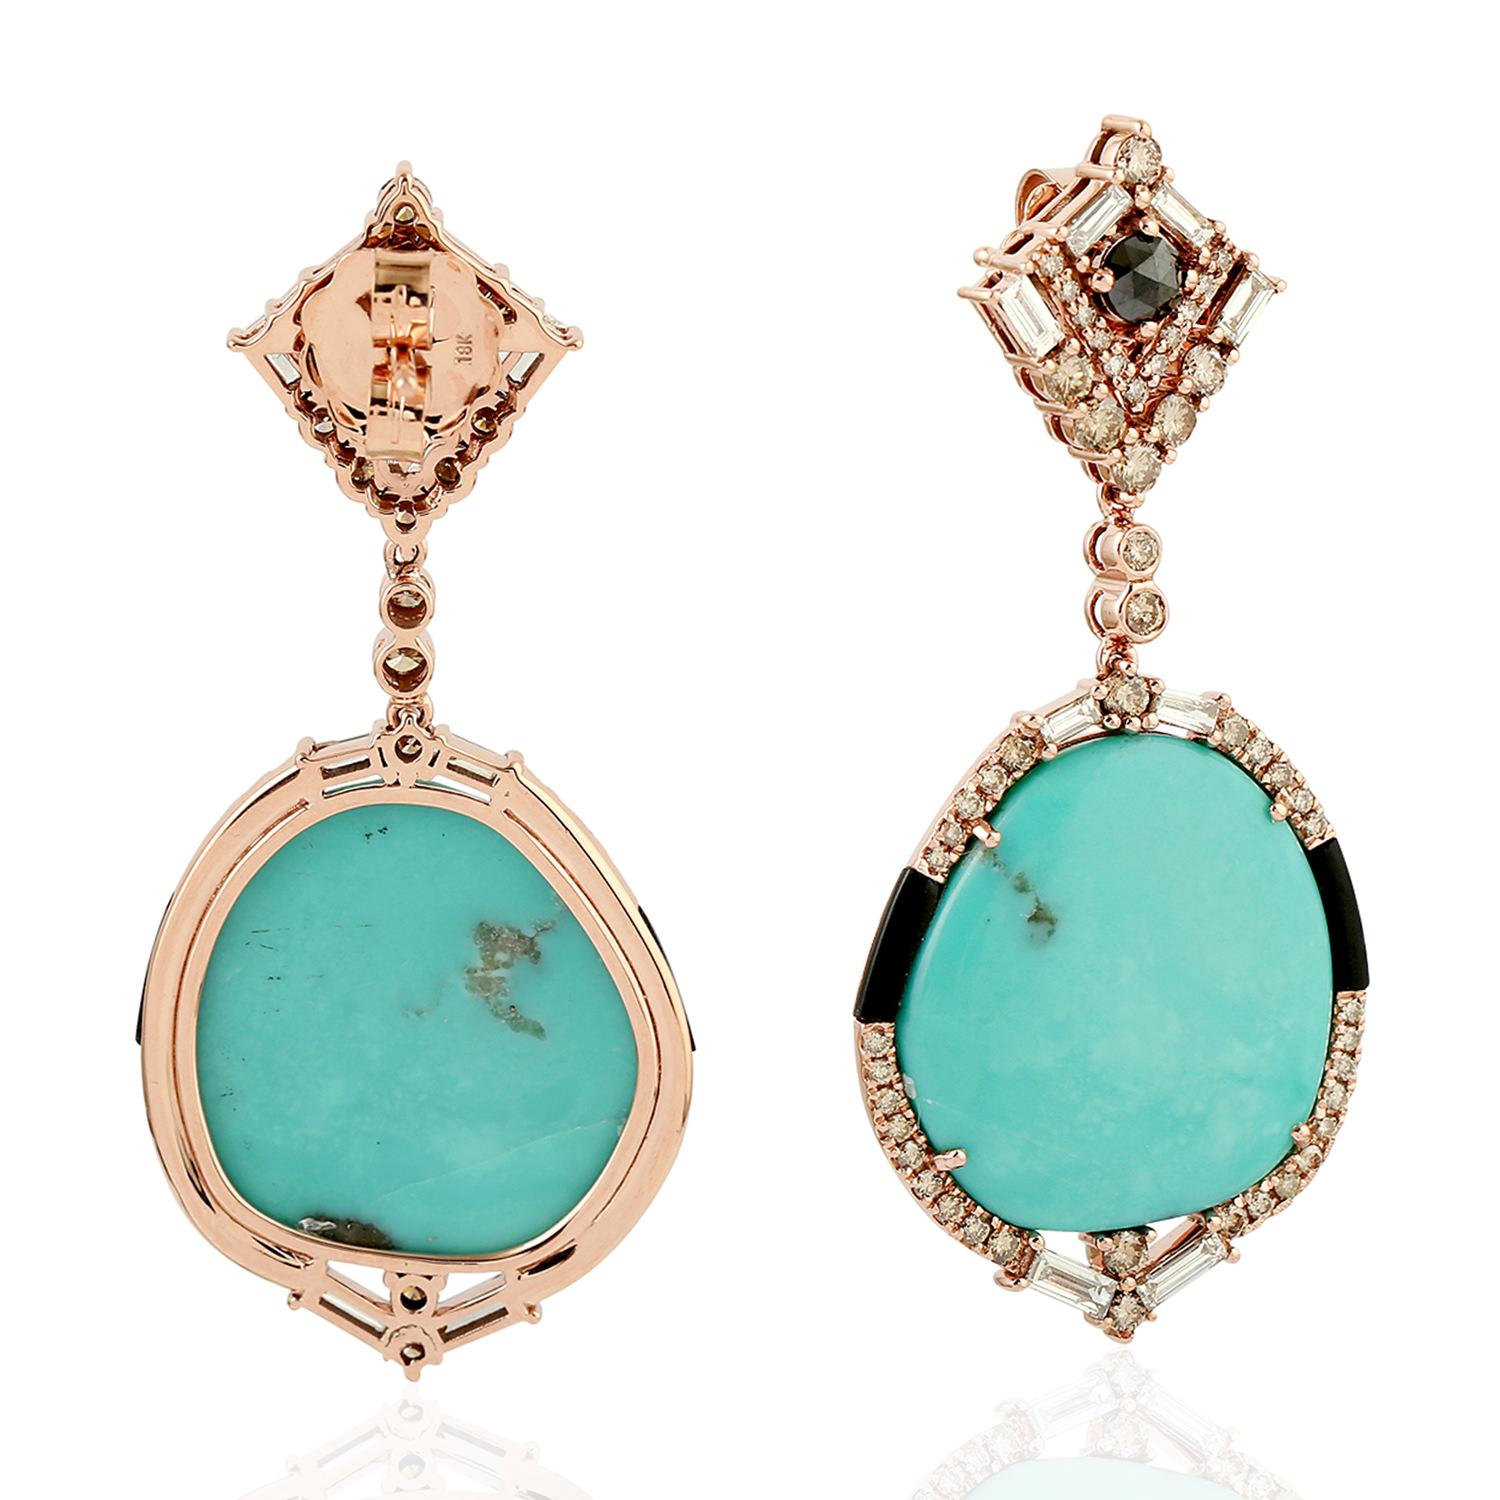 Contemporary 27.50 ct Turquoise Dangle Earrings With Black Onyx & Diamonds In 18k Yellow Gold For Sale